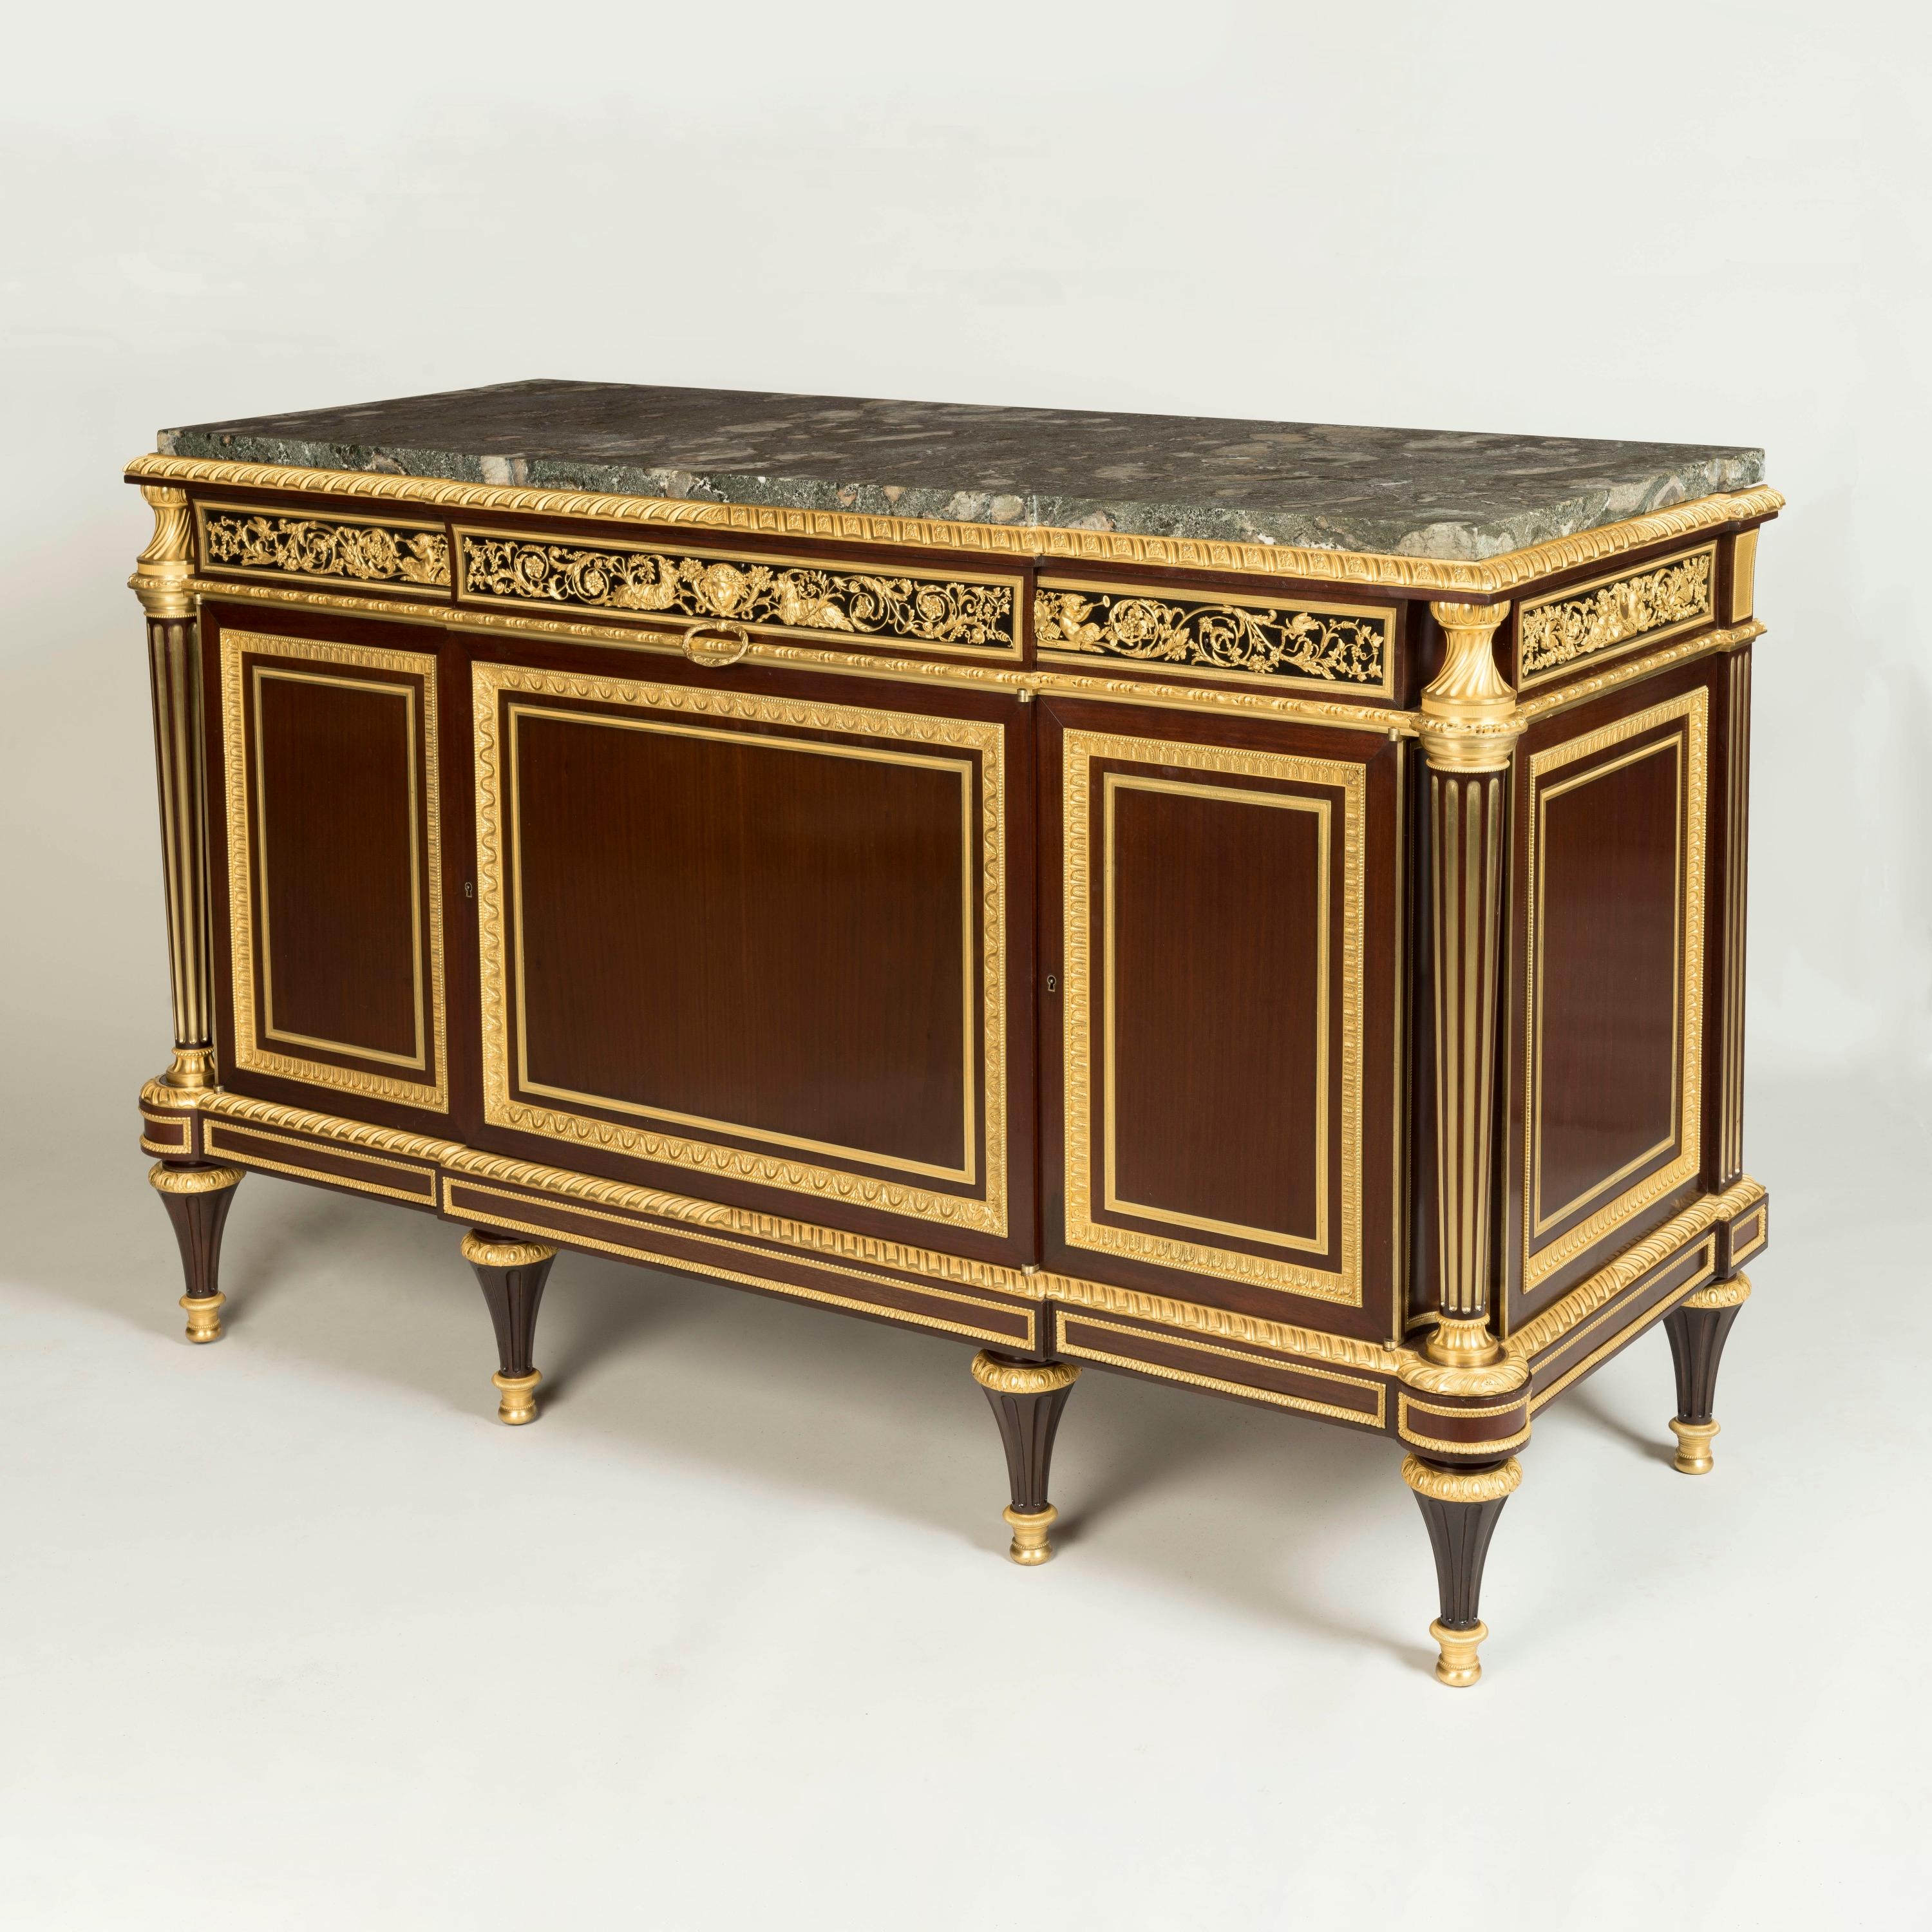 An Important Louis XVI Style Commode
by Henry Dasson

After the Design by Adam Weisweiler
For the King's Cabinet at Saint-Cloud

Constructed from mahogany and incorporating well-cast and chased ormolu mounts, the breakfront side cabinet supported on